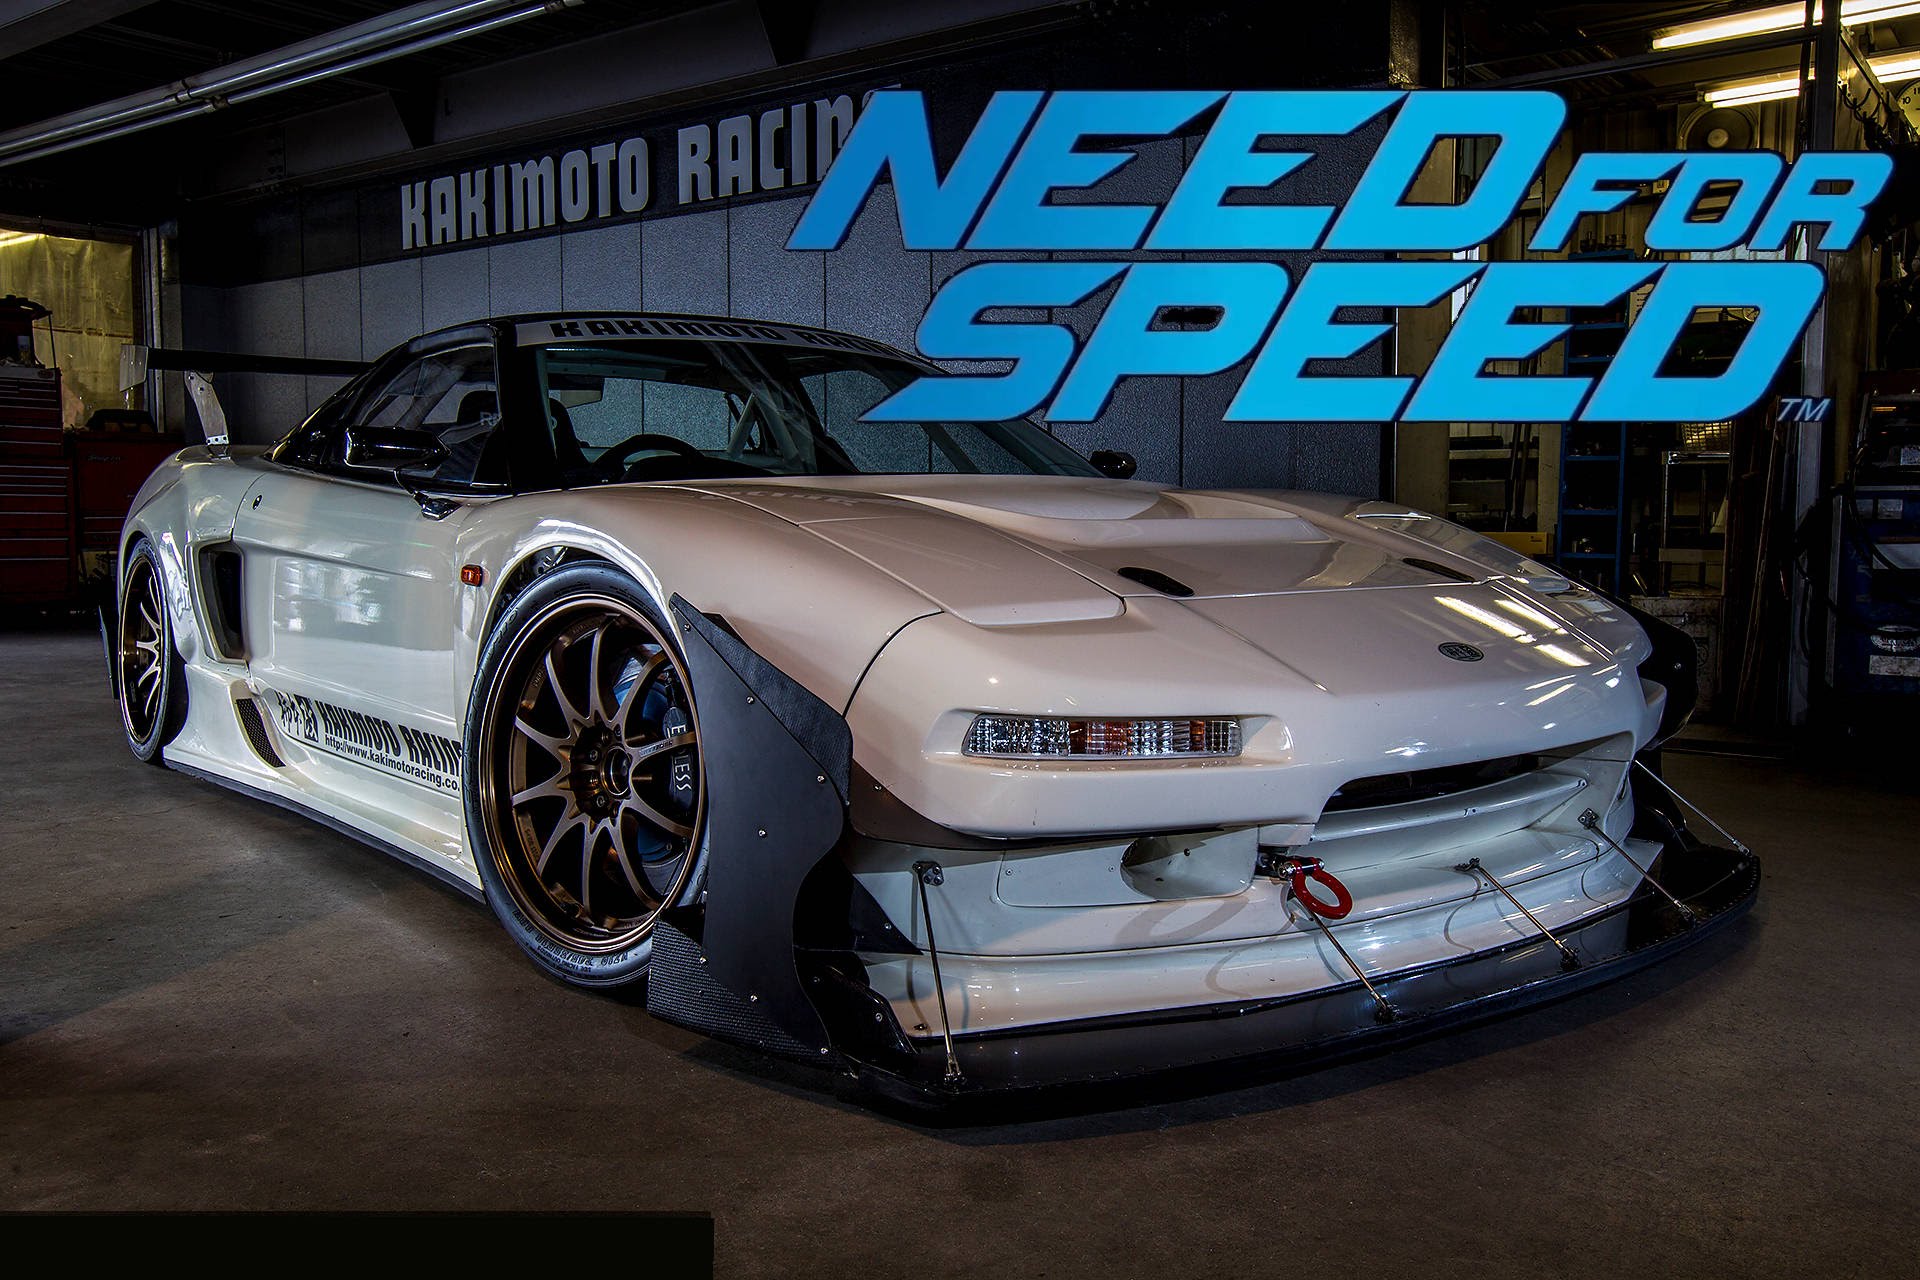 Need for speed 2015 free download game pc